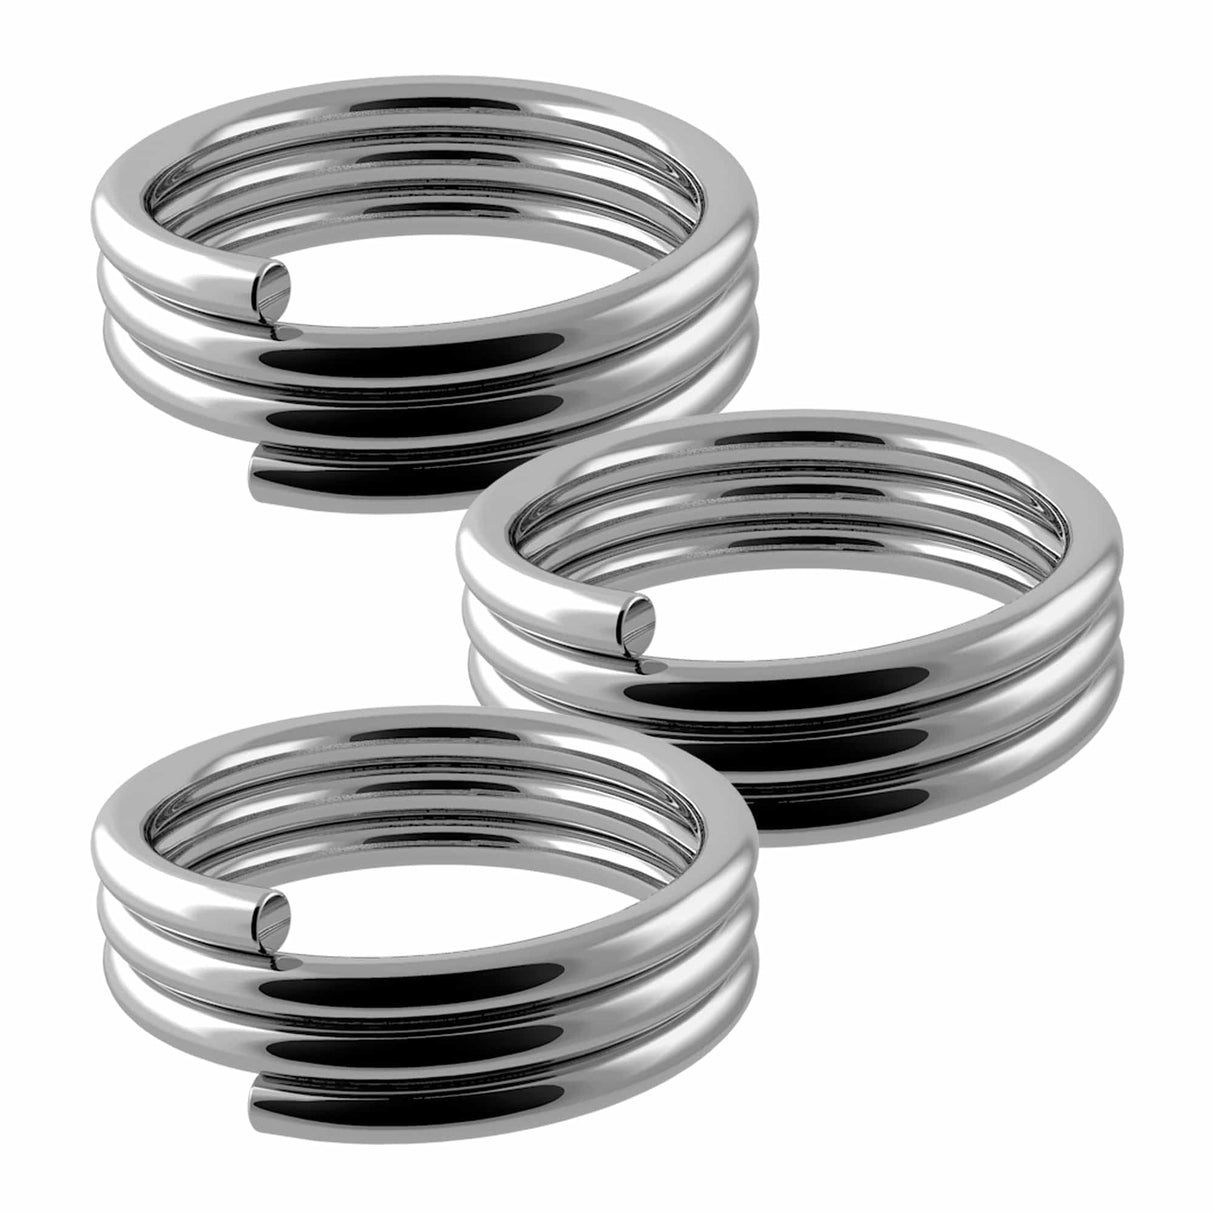 Designa Springs - for use with Nylon Shafts - 10 Sets (30) Silver